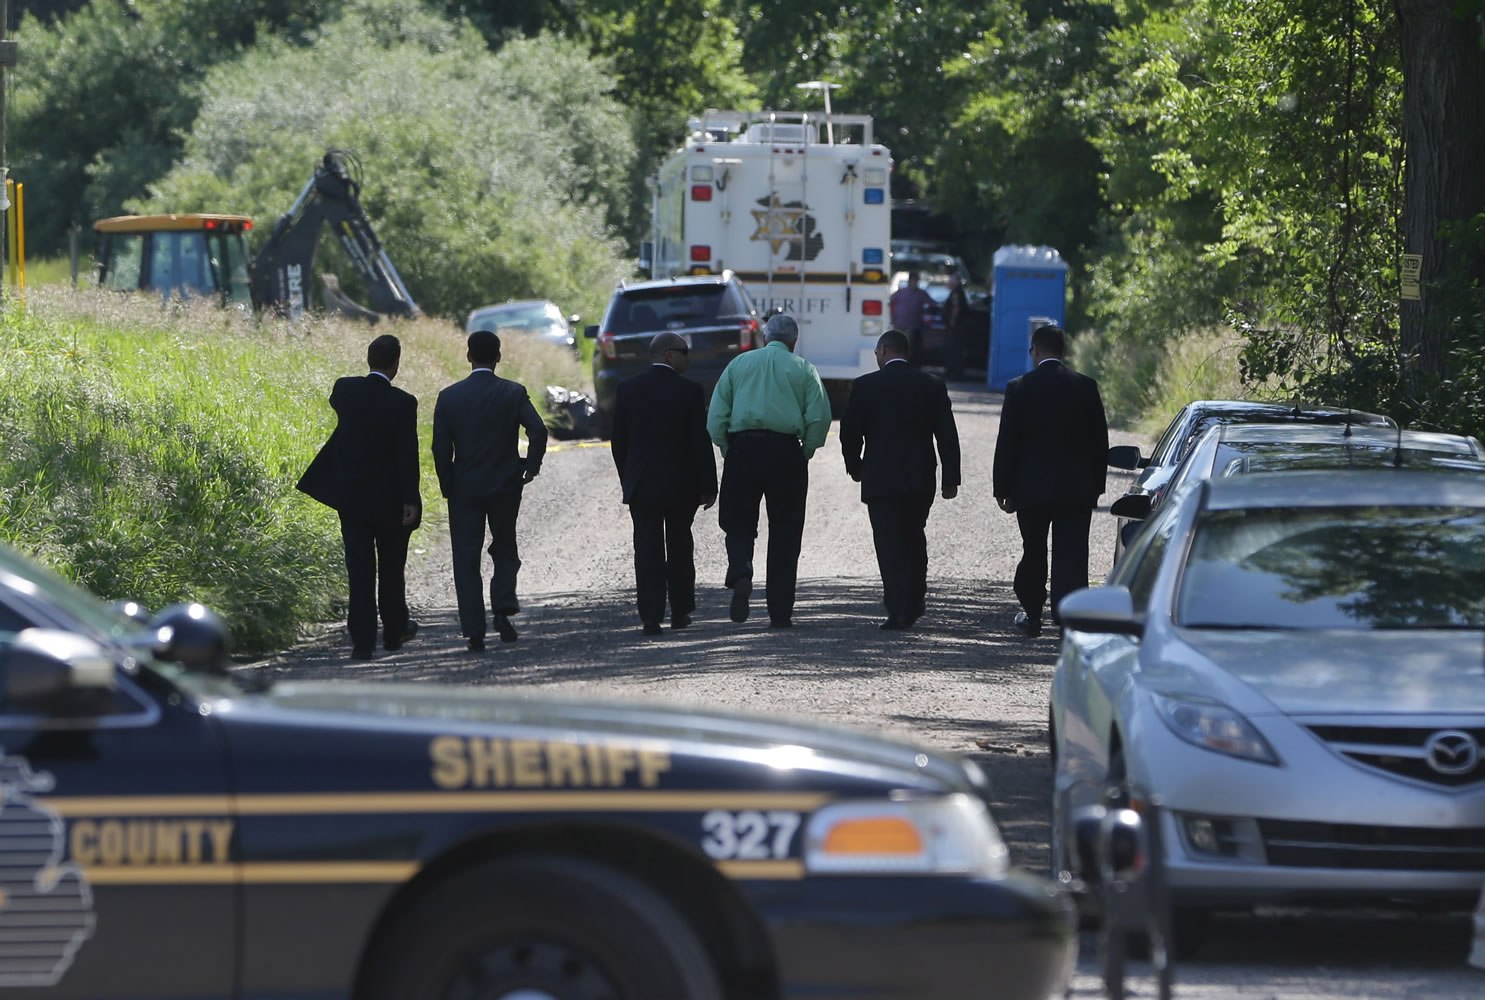 Law enforcement officials walk back to the search area after Robert Foley, special agent in charge of the FBI's Detroit division, addressed the media in Oakland Township, Mich., on Wednesday and announced the FBI was ending the search operations for the remains of Teamsters union president Jimmy Hoffa who disappeared from a Detroit-area restaurant in 1975.